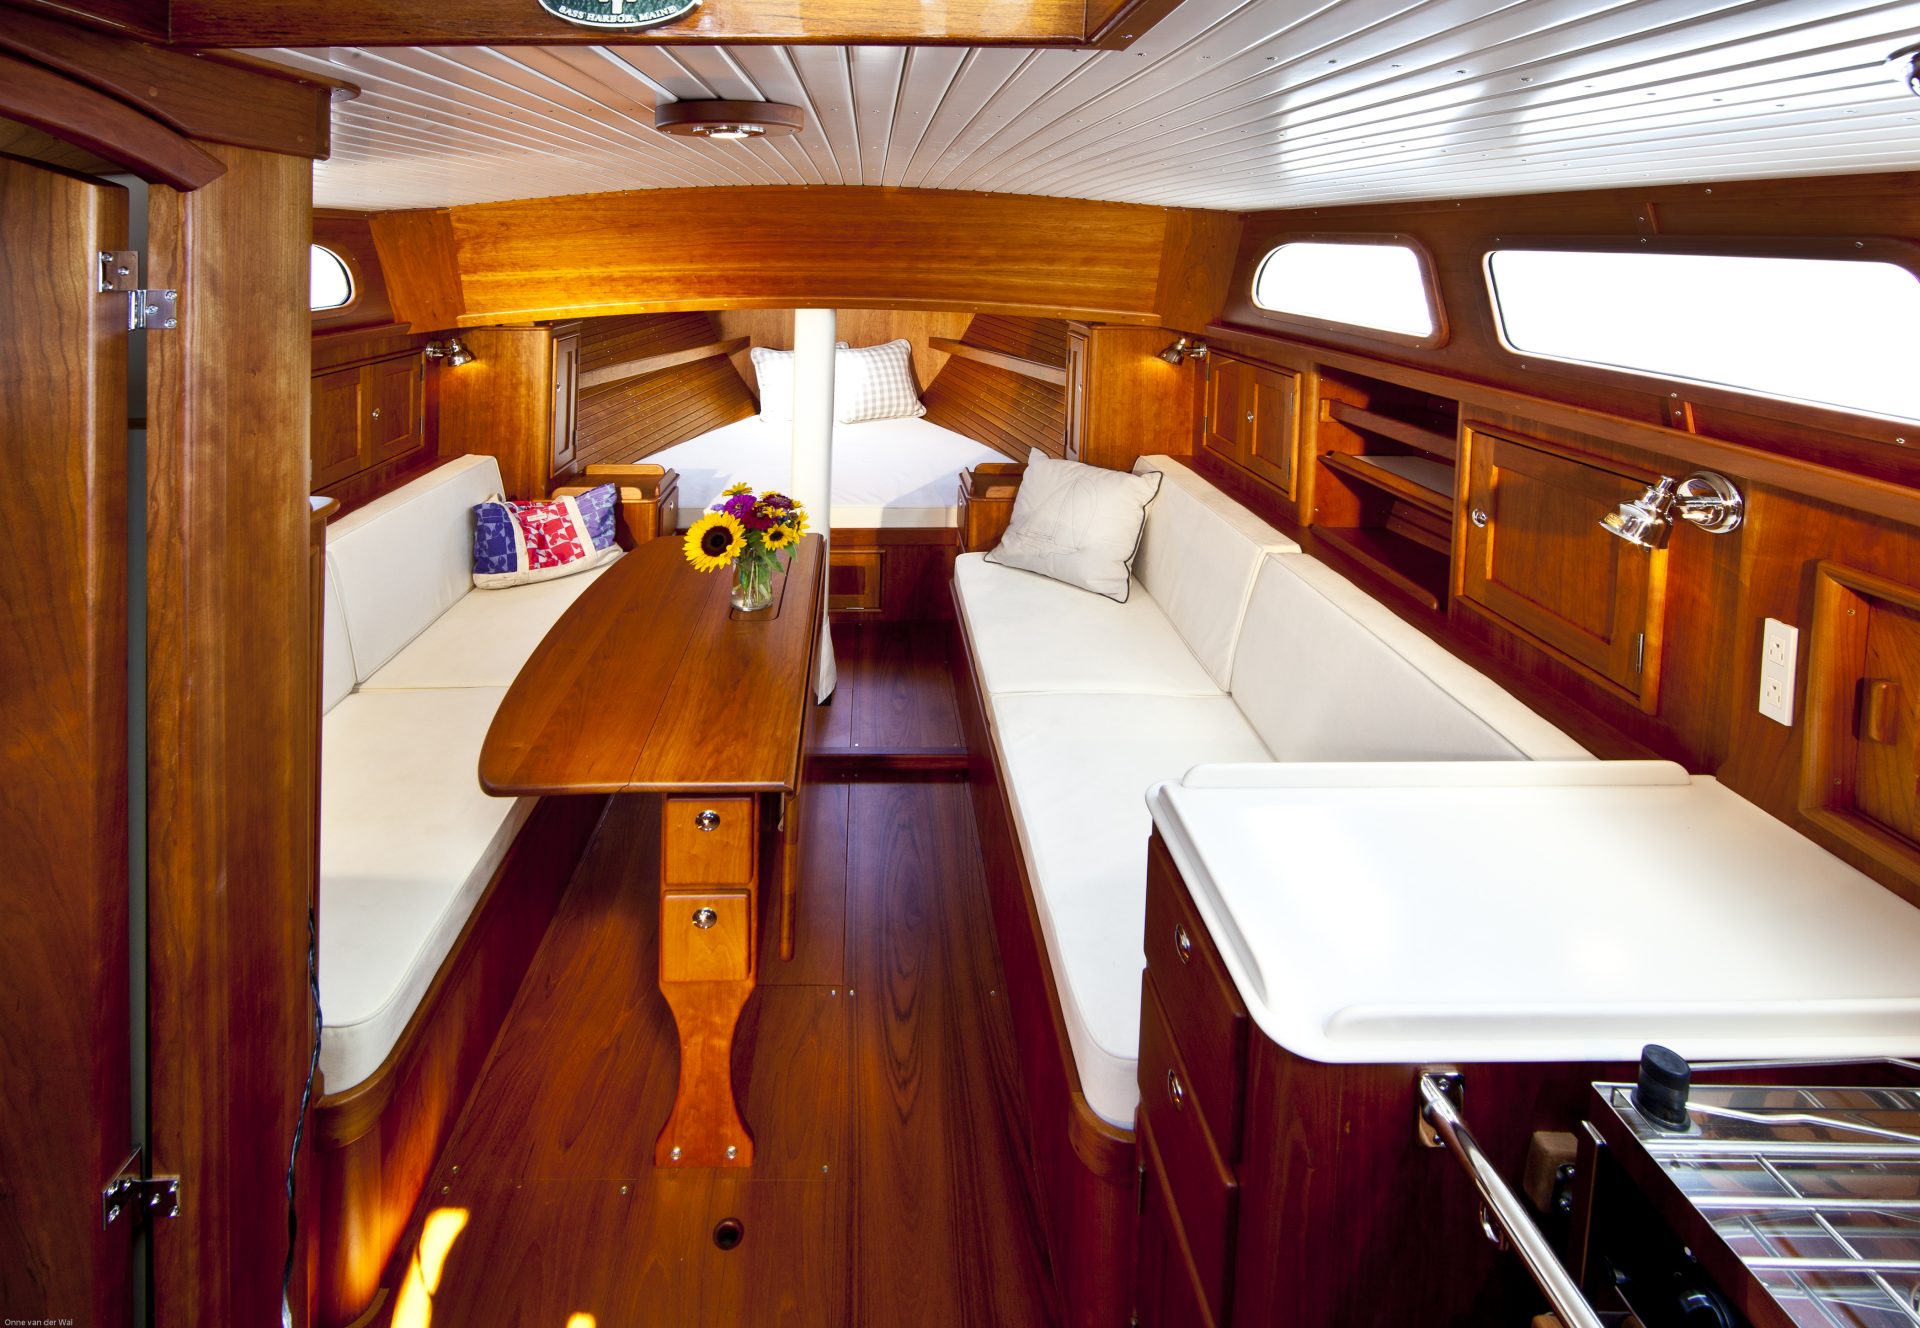 morris yachts for sale